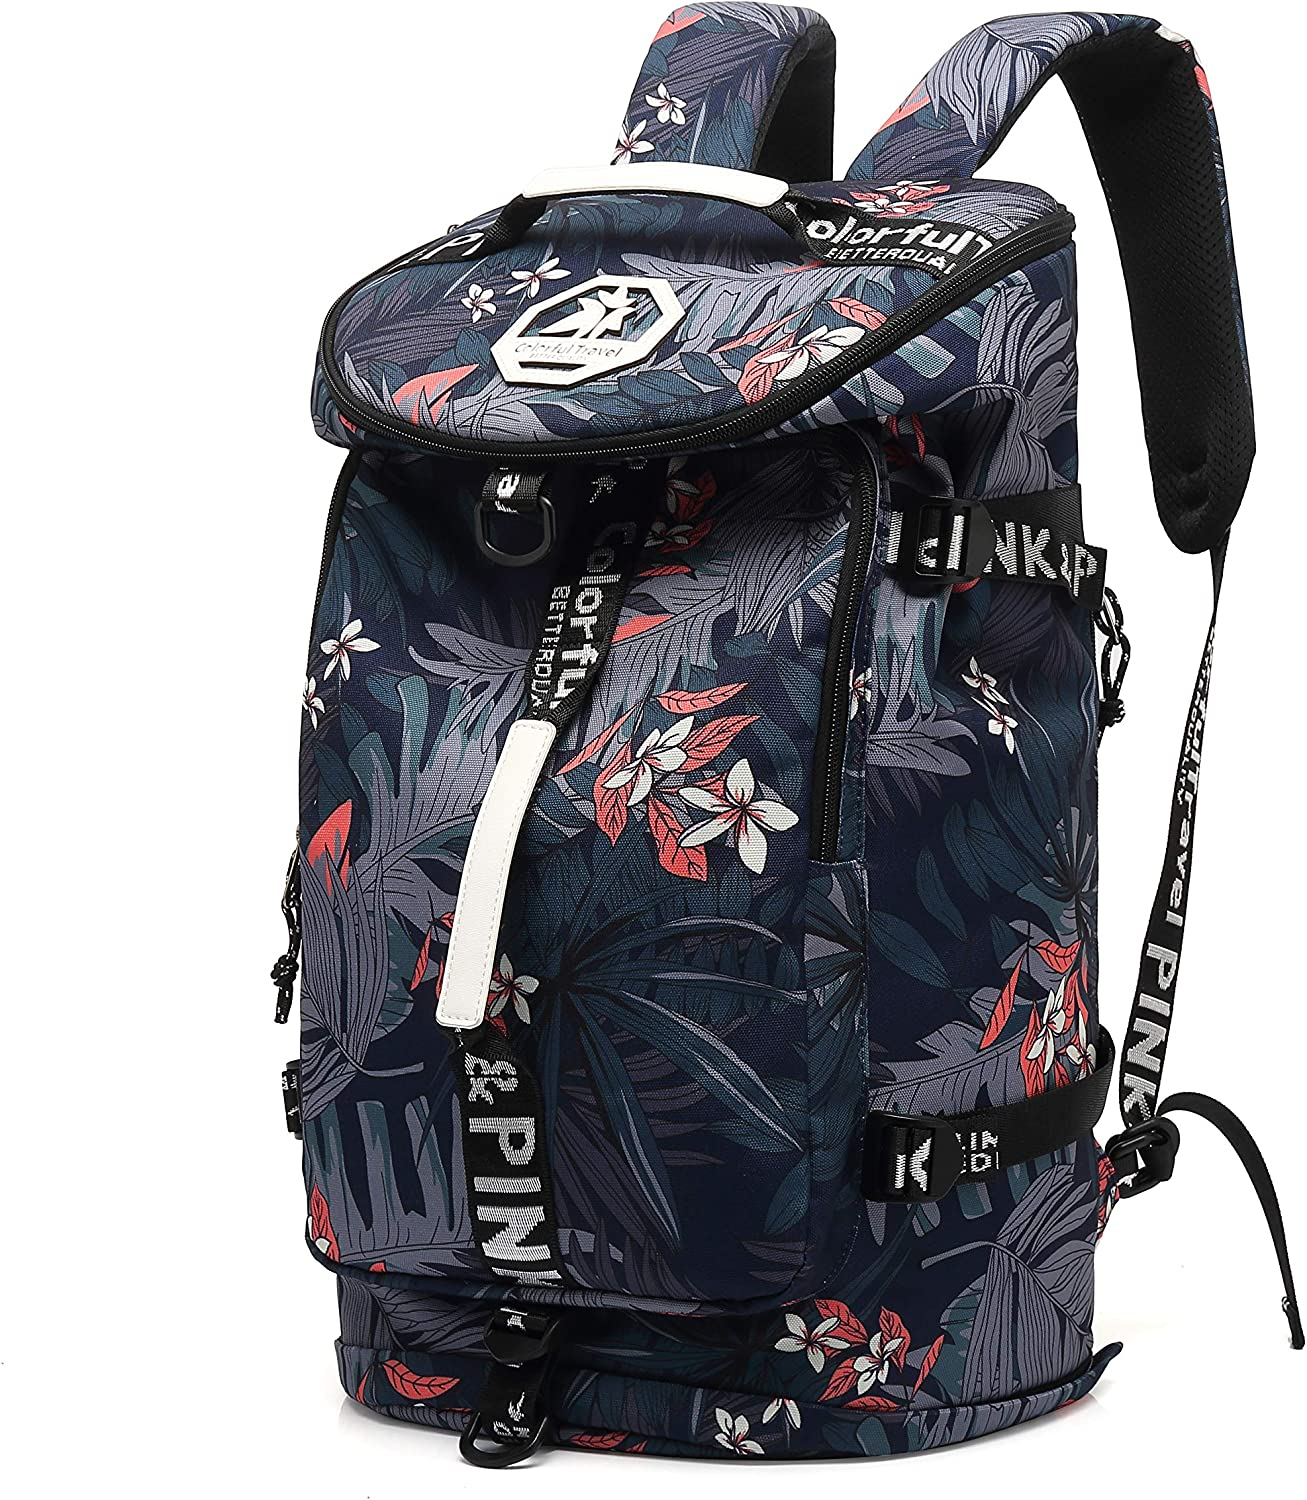 Kalesi Store's gym backpack: Best Women's Gym Backpack with Shoe Compartment